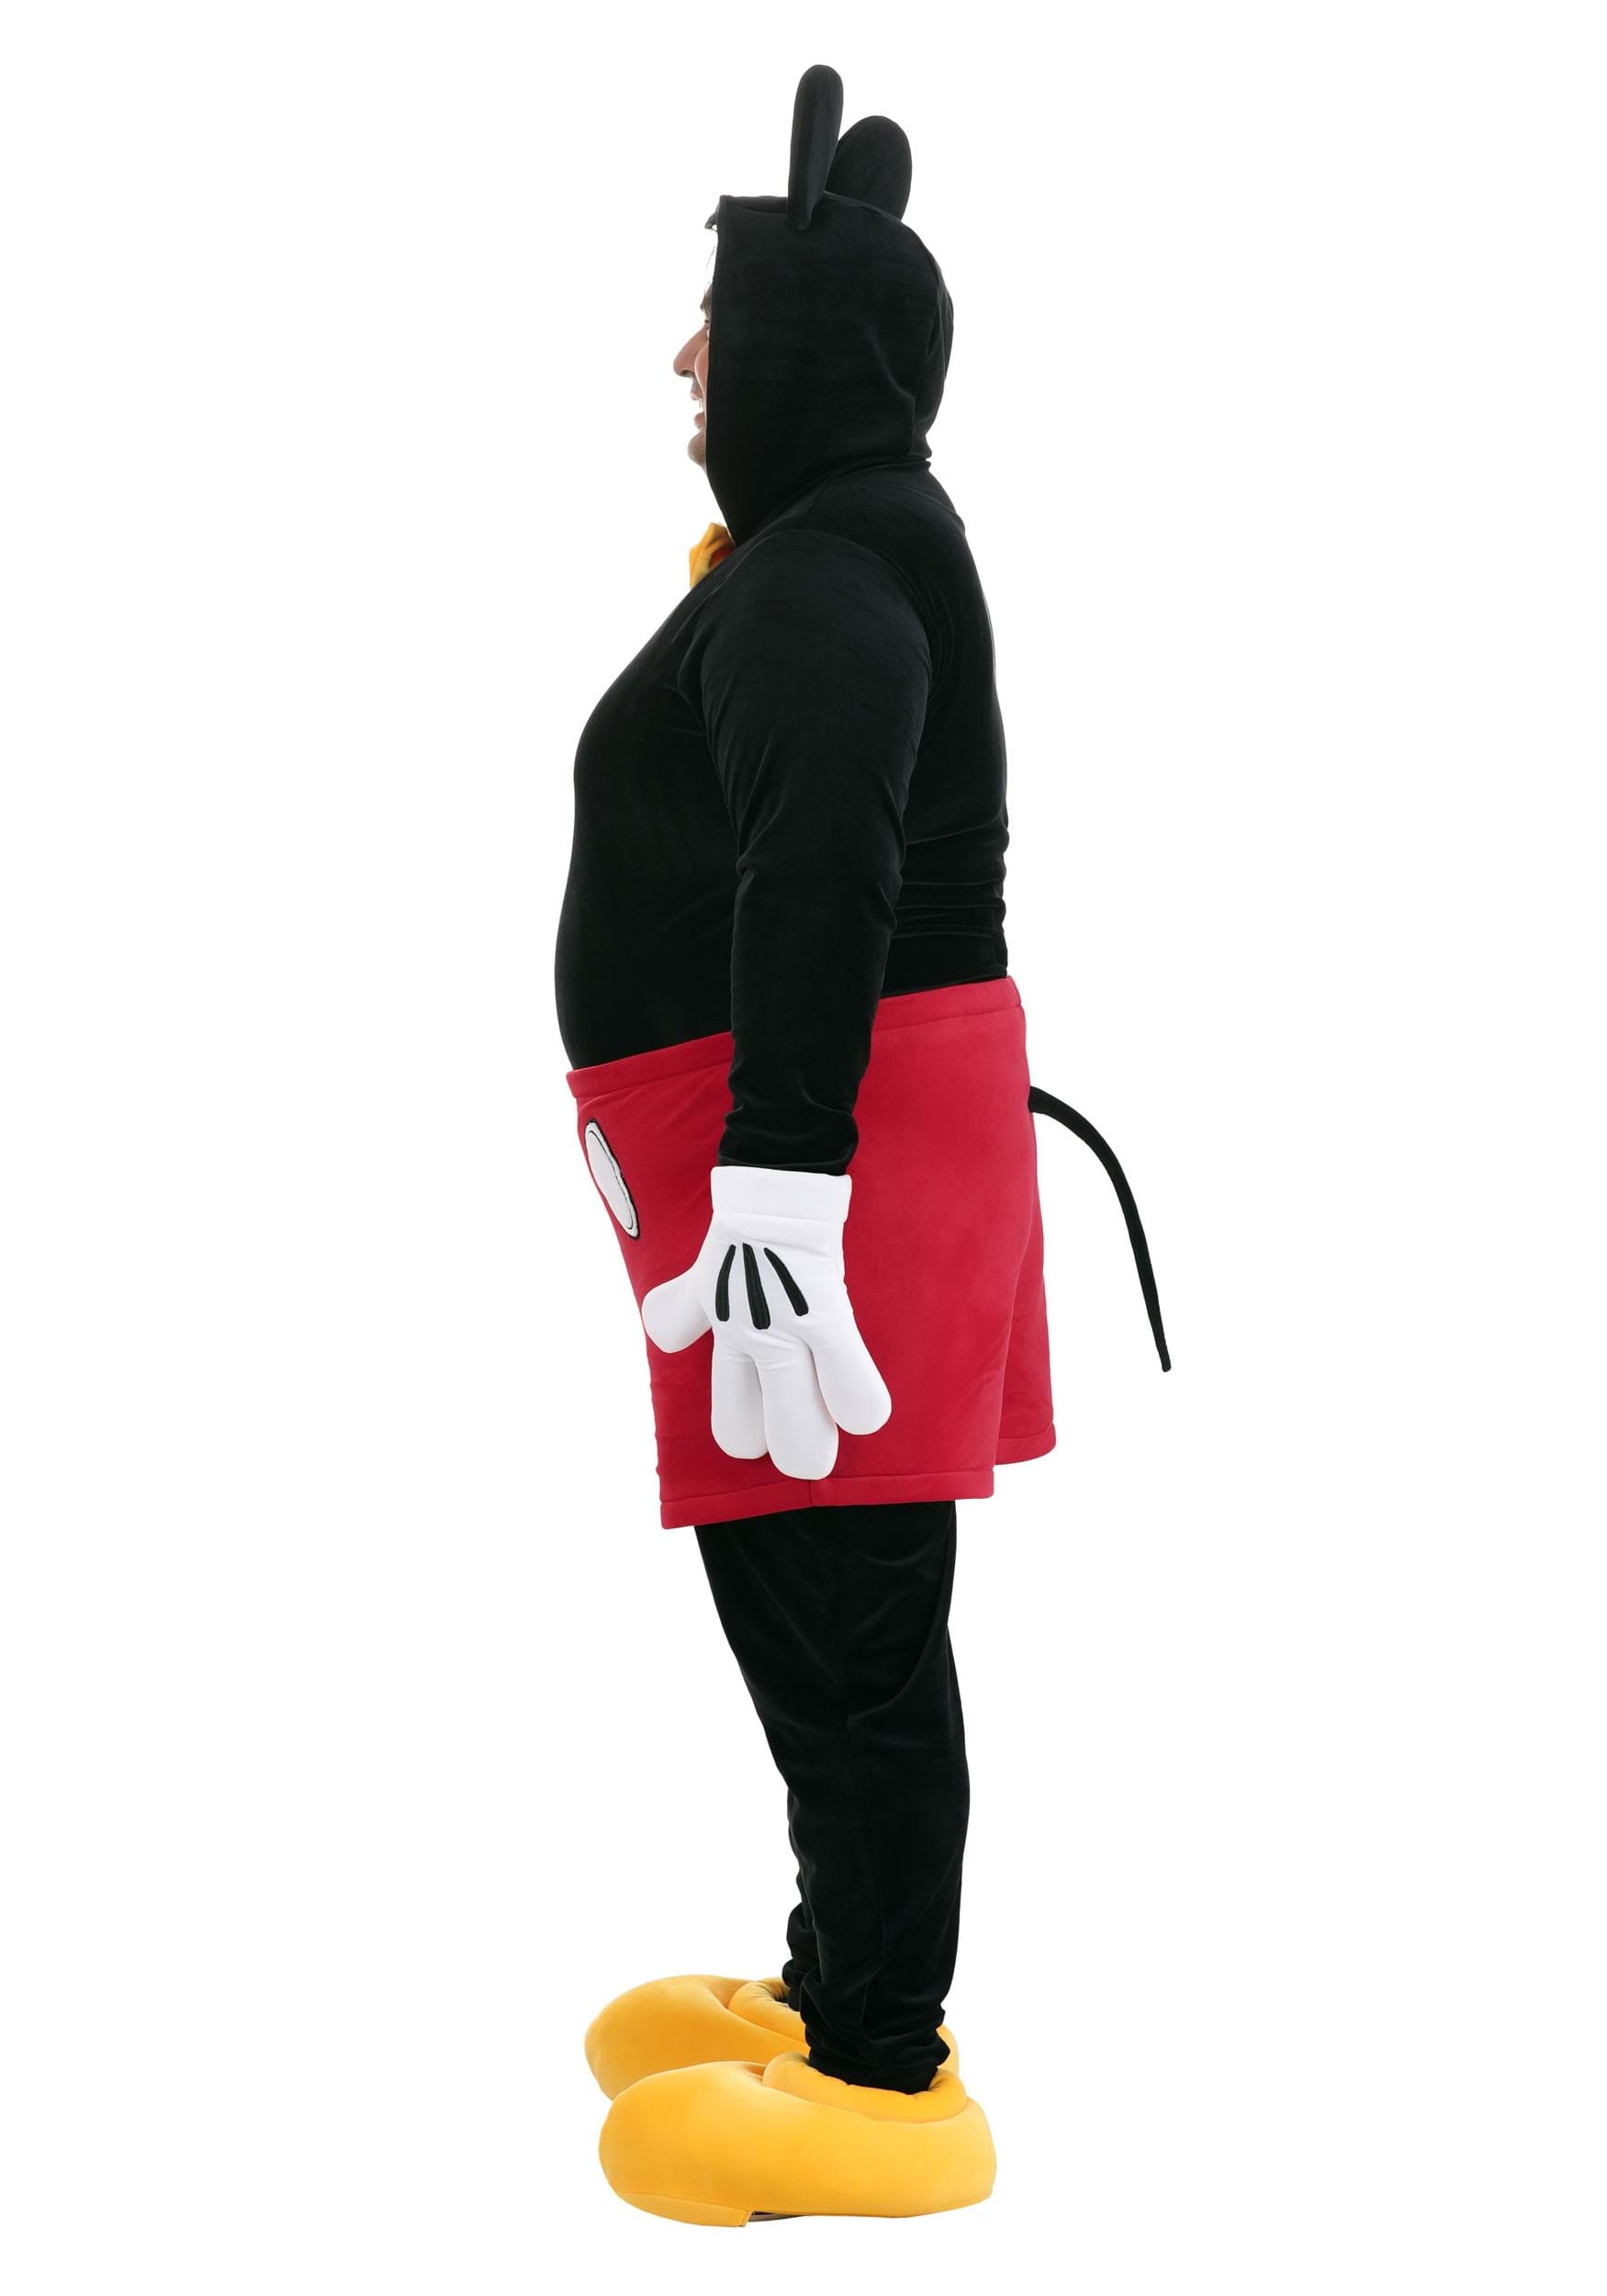 https://images.fun.com/products/74863/2-1-266396/plus-size-disney-deluxe-mickey-mouse-costume-alt-3.jpg